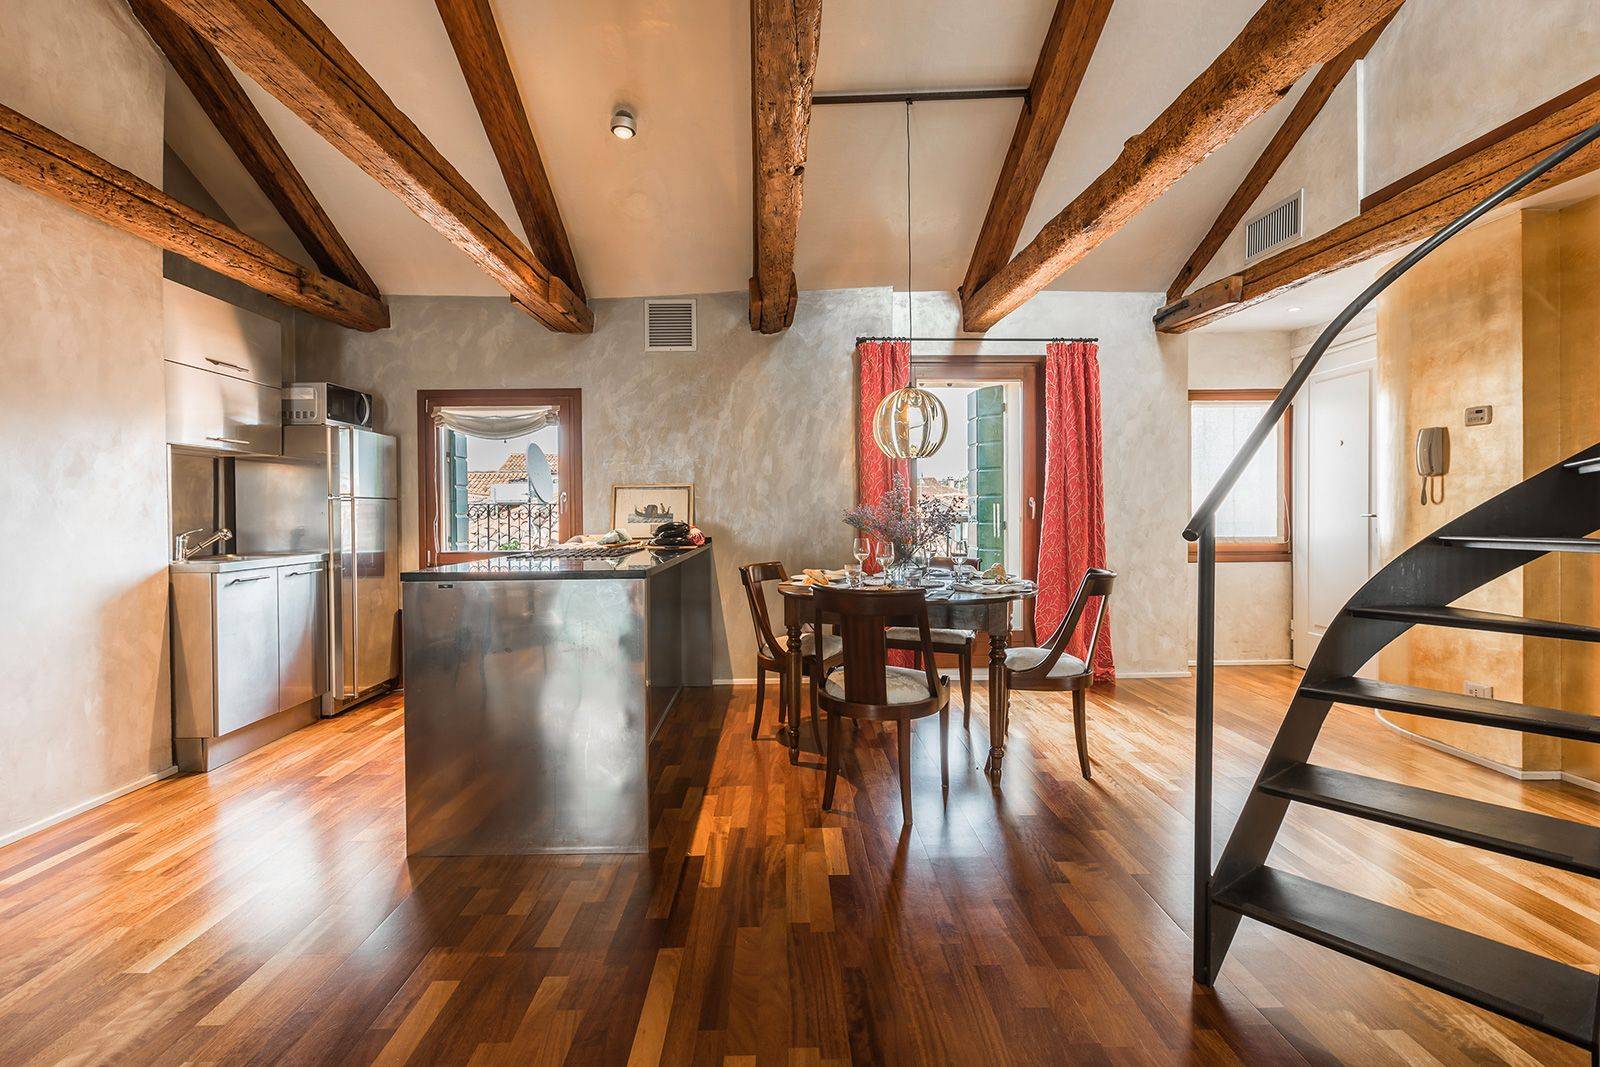 the antique wooden beams and the parquet flooring confer warmth to the ambience